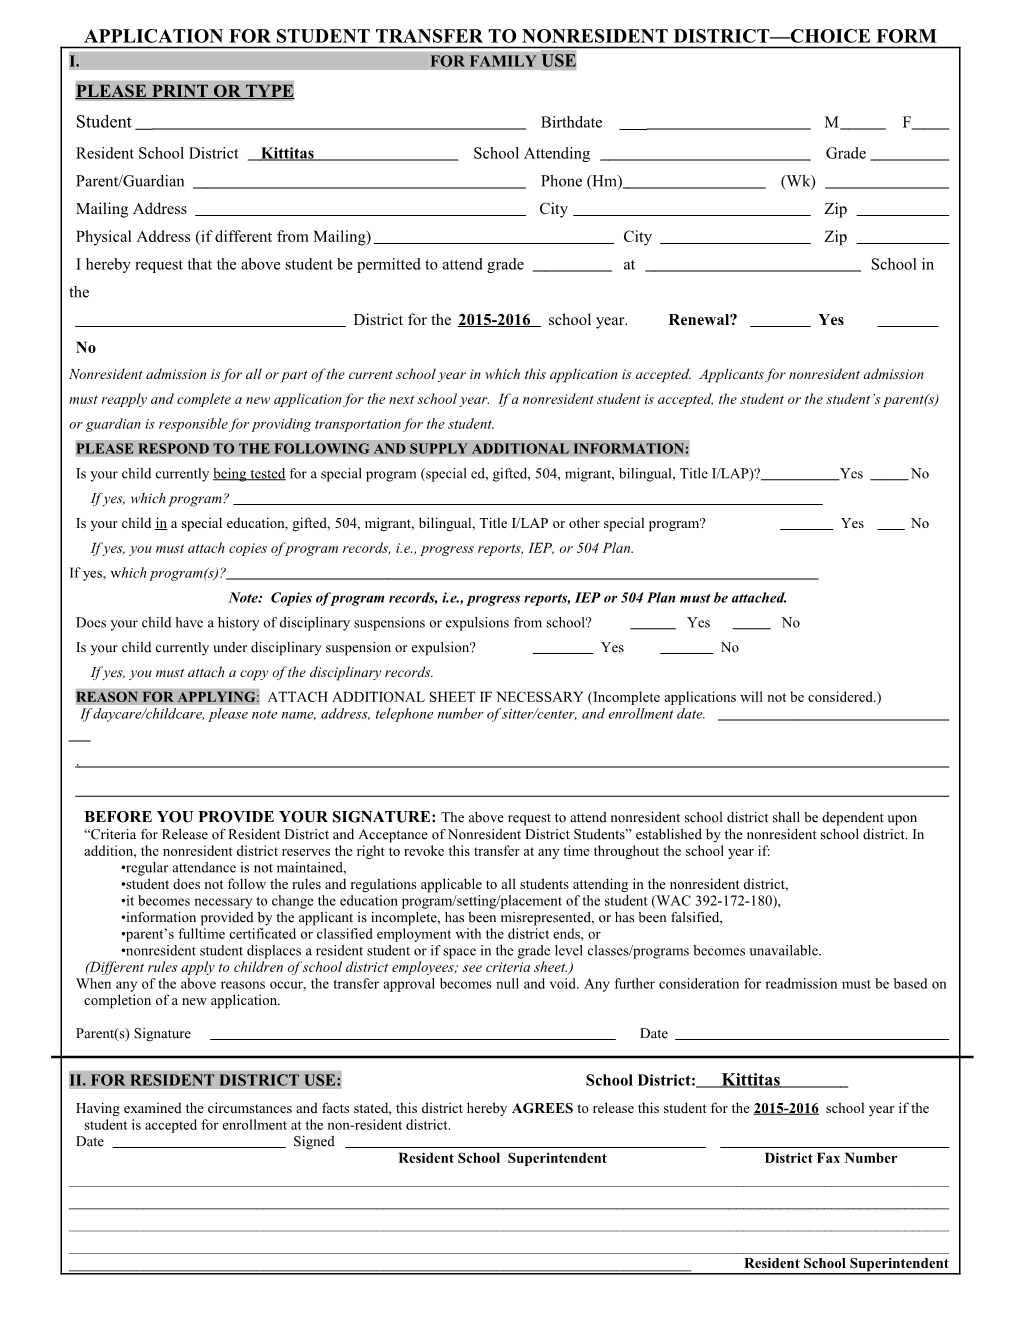 Nonresident Attend.Form